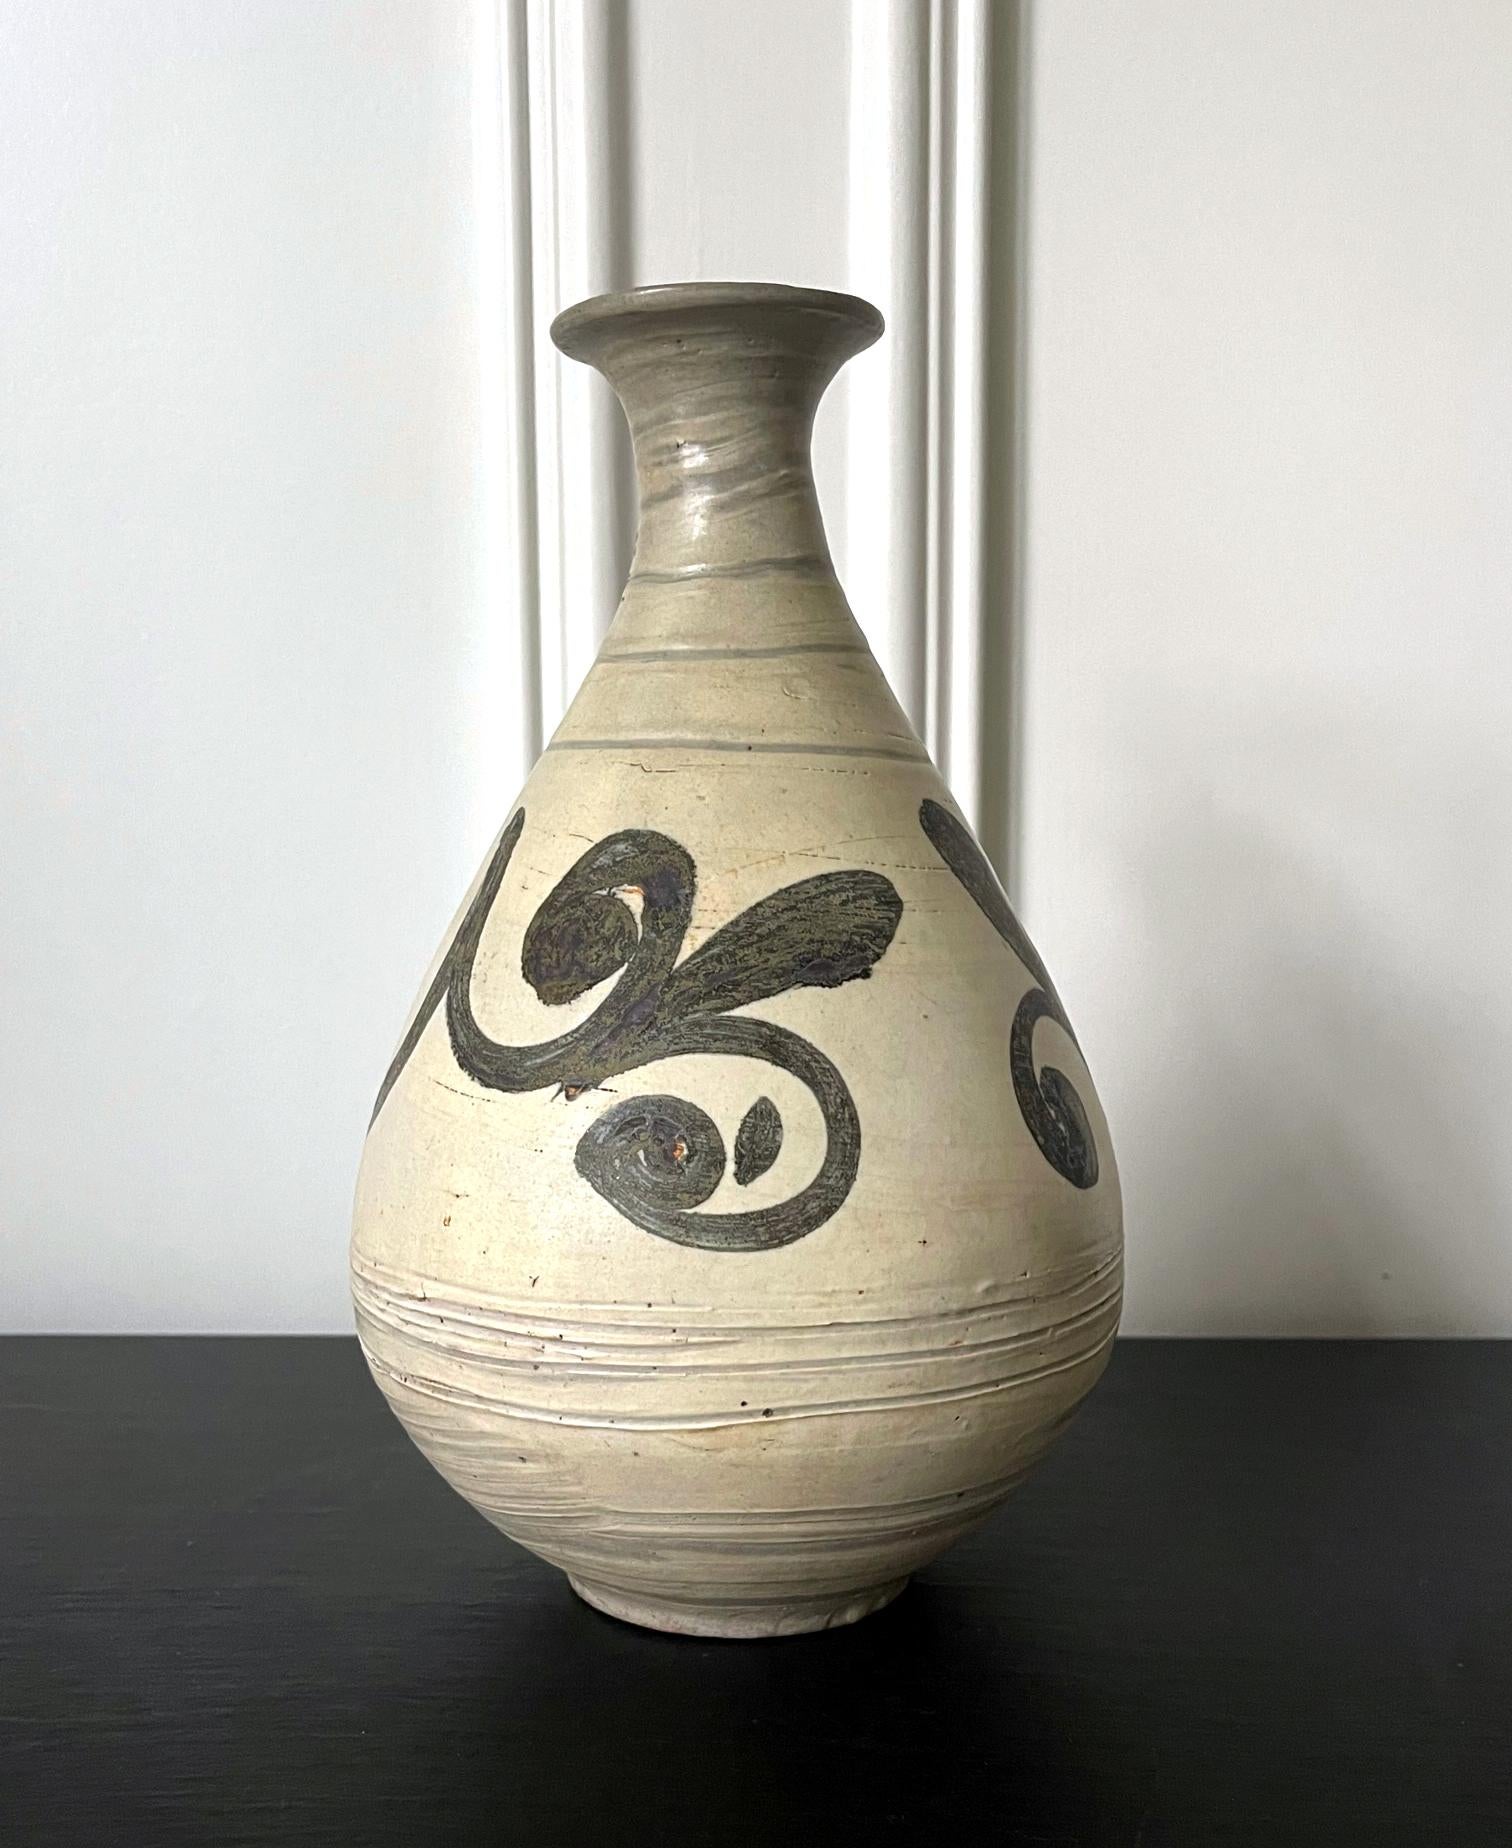 An antique Korean Buncheong stoneware vase from early Joseon Dynasty circa late 15th to early 16th century. The vase is of a classic pear form with a waisted neck and a flared mouth. The generous body is supported by a ringed base. The surface is